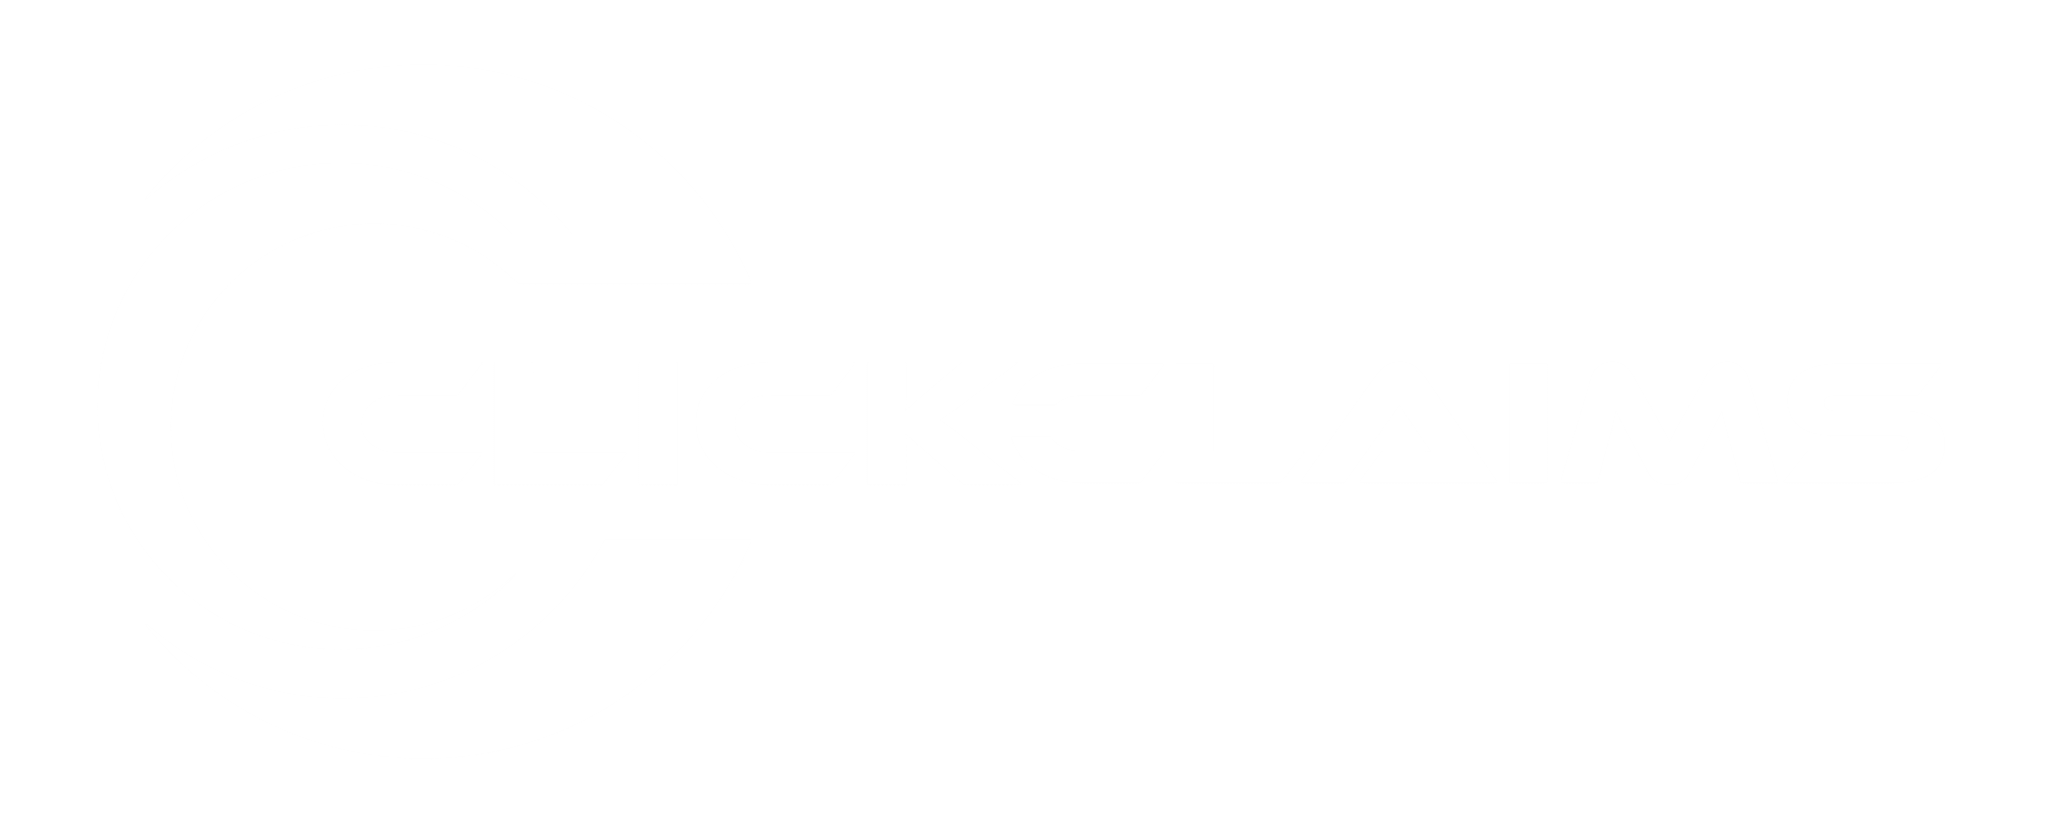 ClickClaims Claims Management Solutions